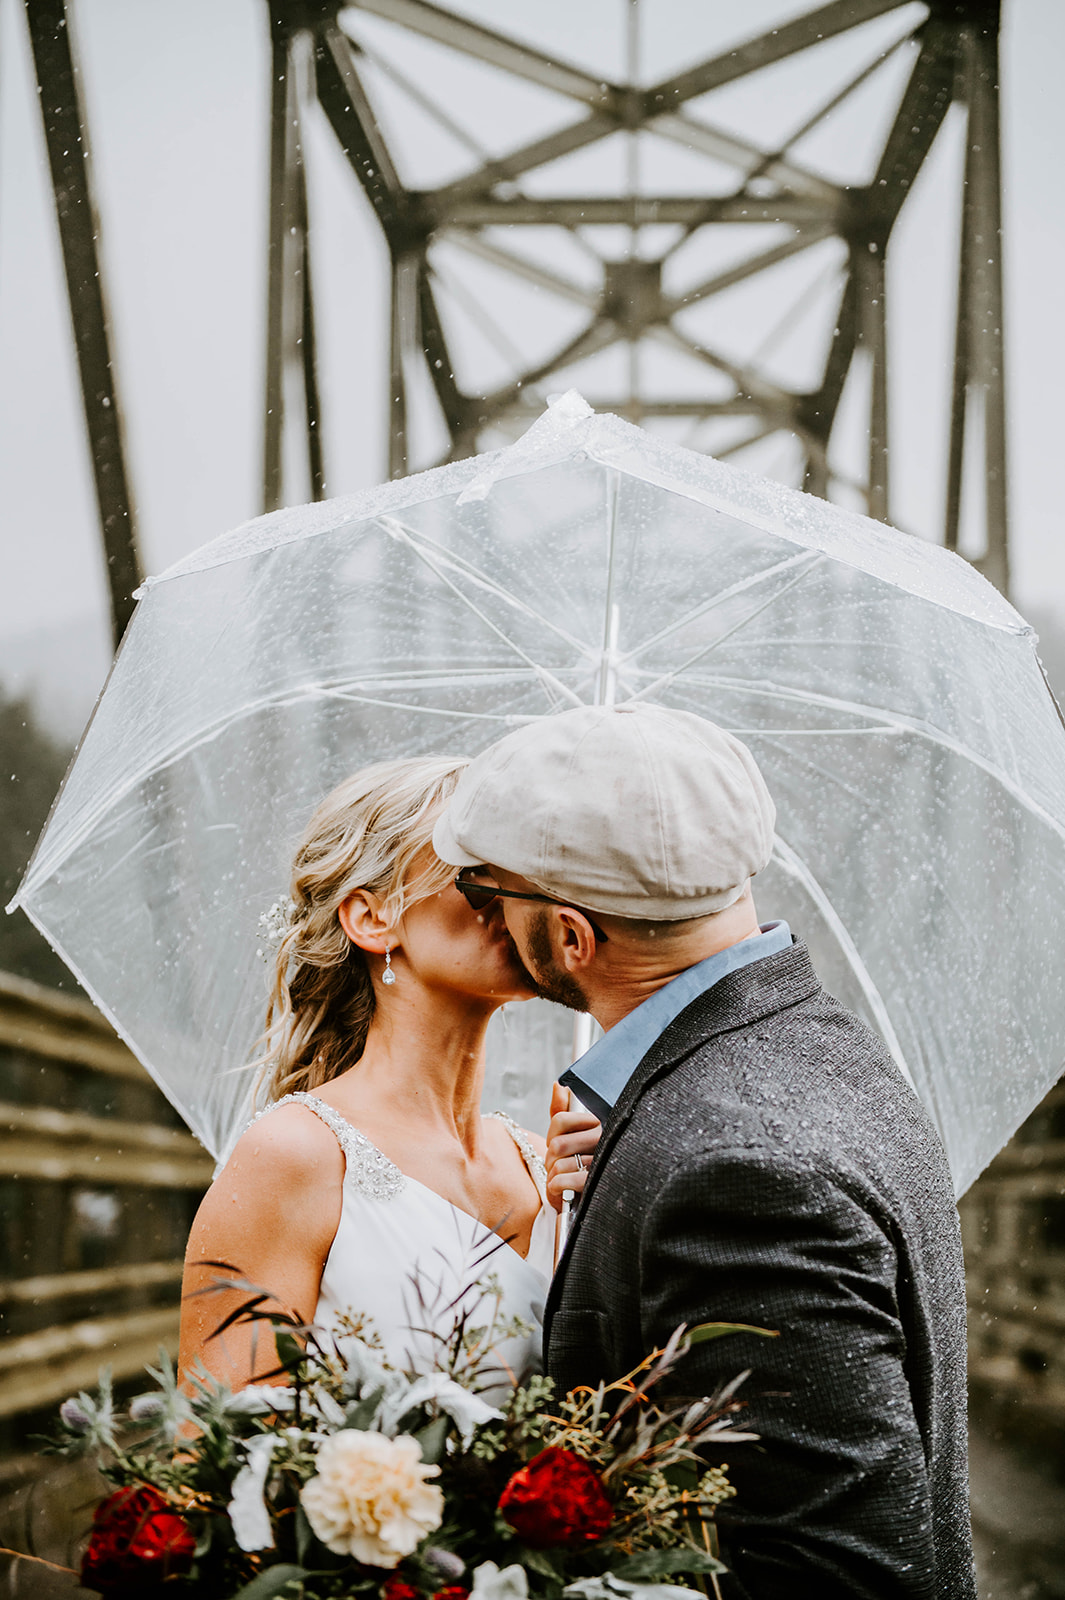 A bride and groom kissing on Myrtle Tree Bridge under a clear umbrella.